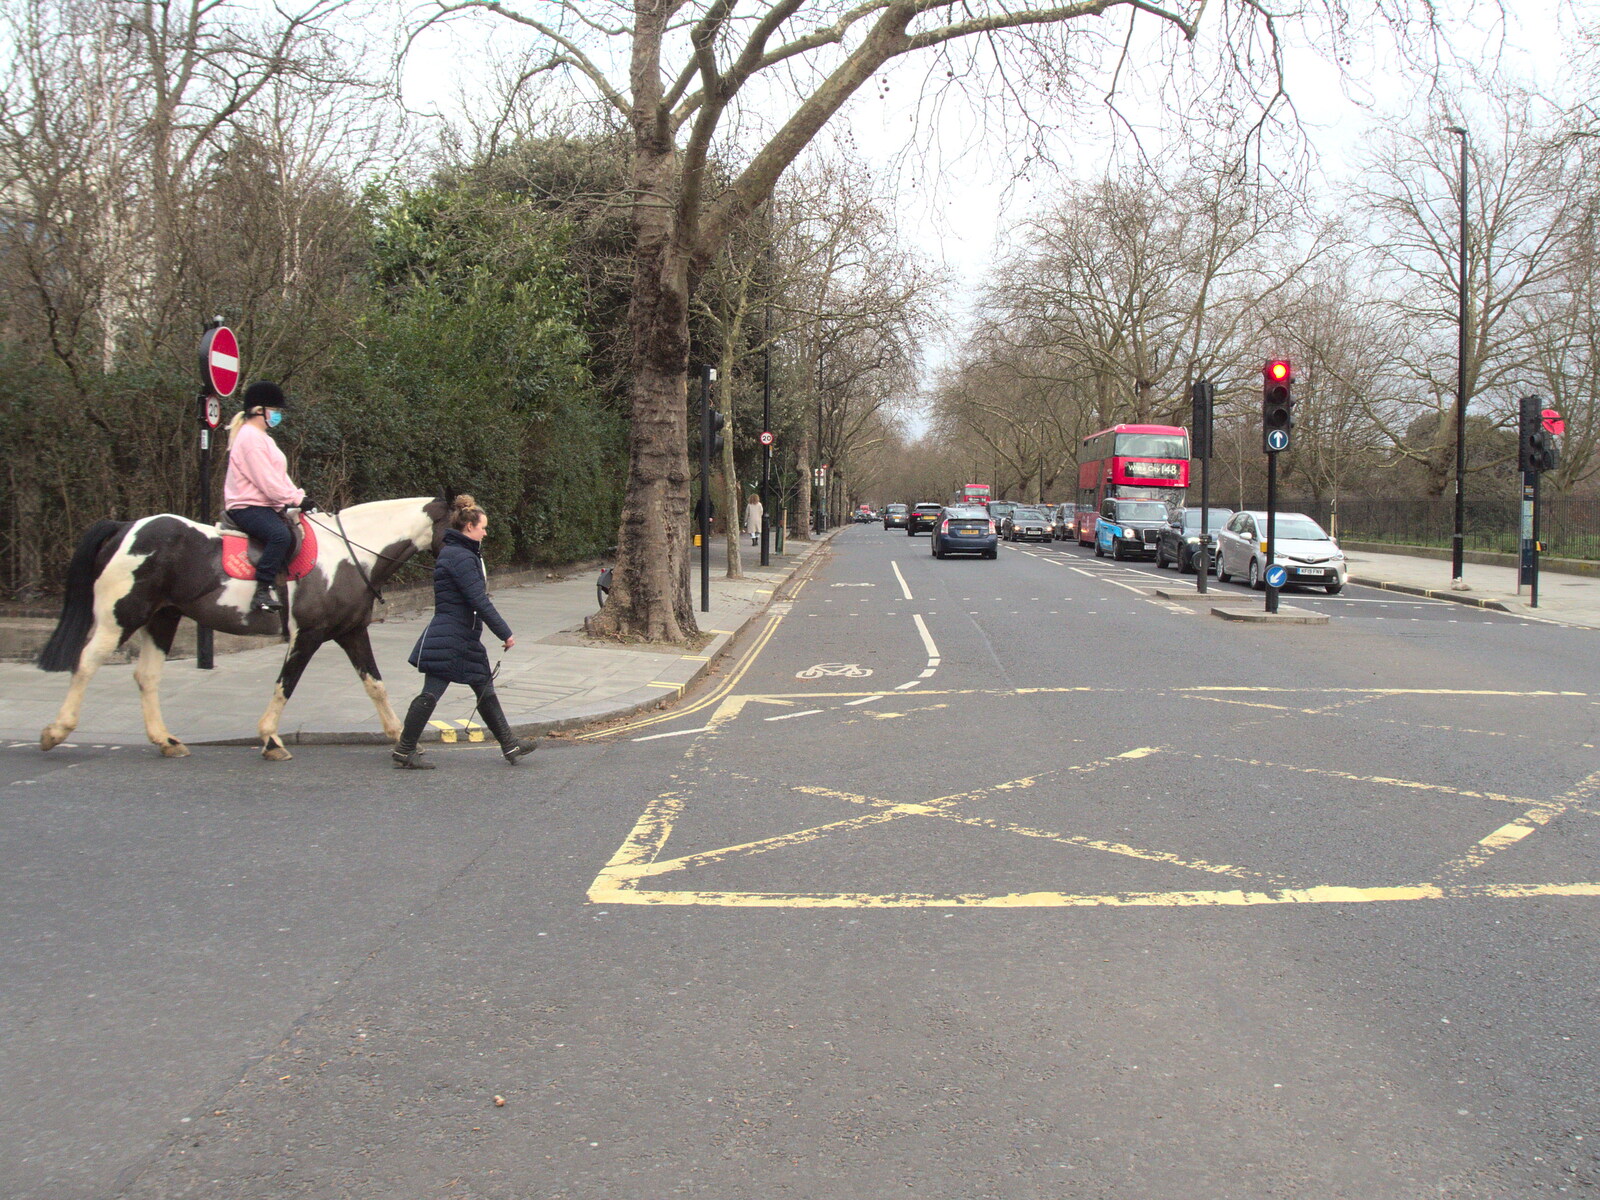 A horse crosses Bayswater Road from The Last Trip to the SwiftKey Office, Paddington, London - 23rd February 2022